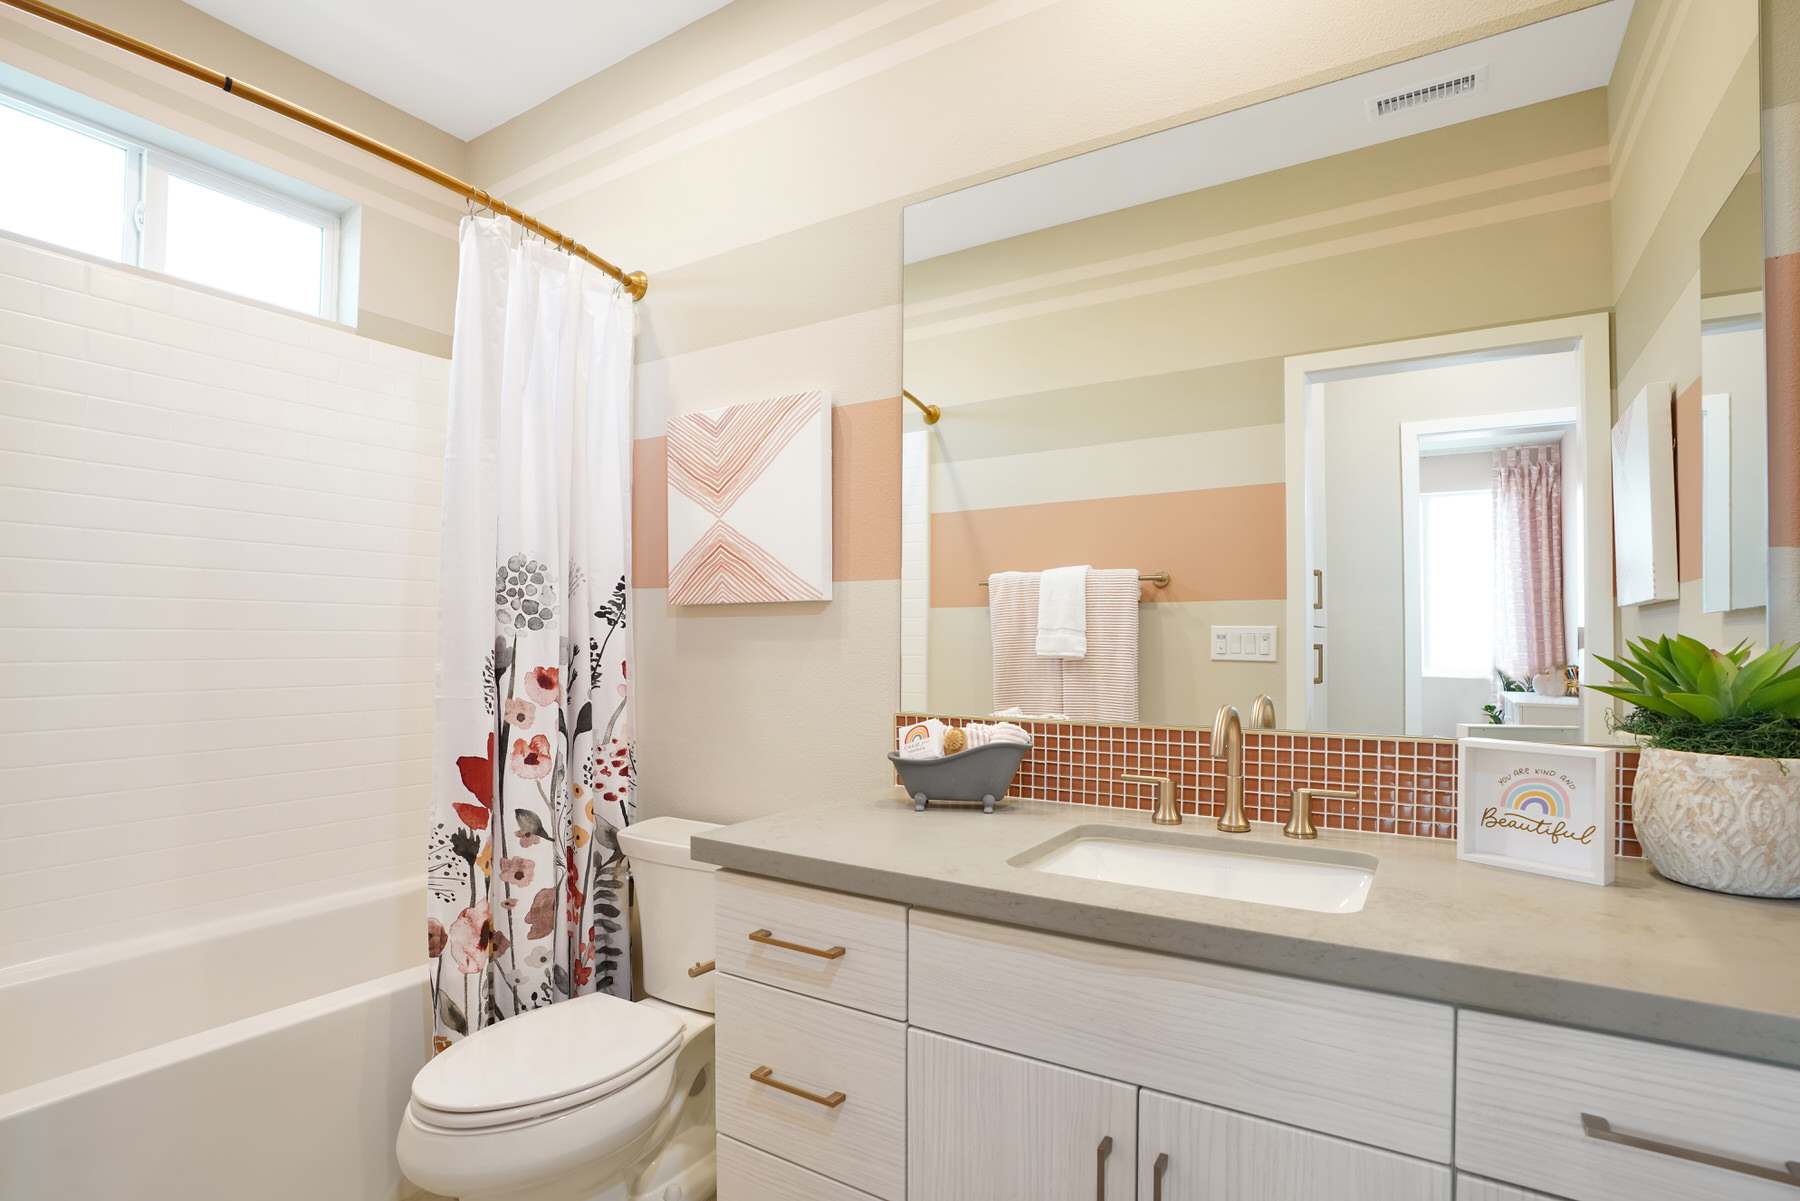 Bath 2 in Plan 4A at Townes at Magnolia by Melia Homes in Anaheim, CA